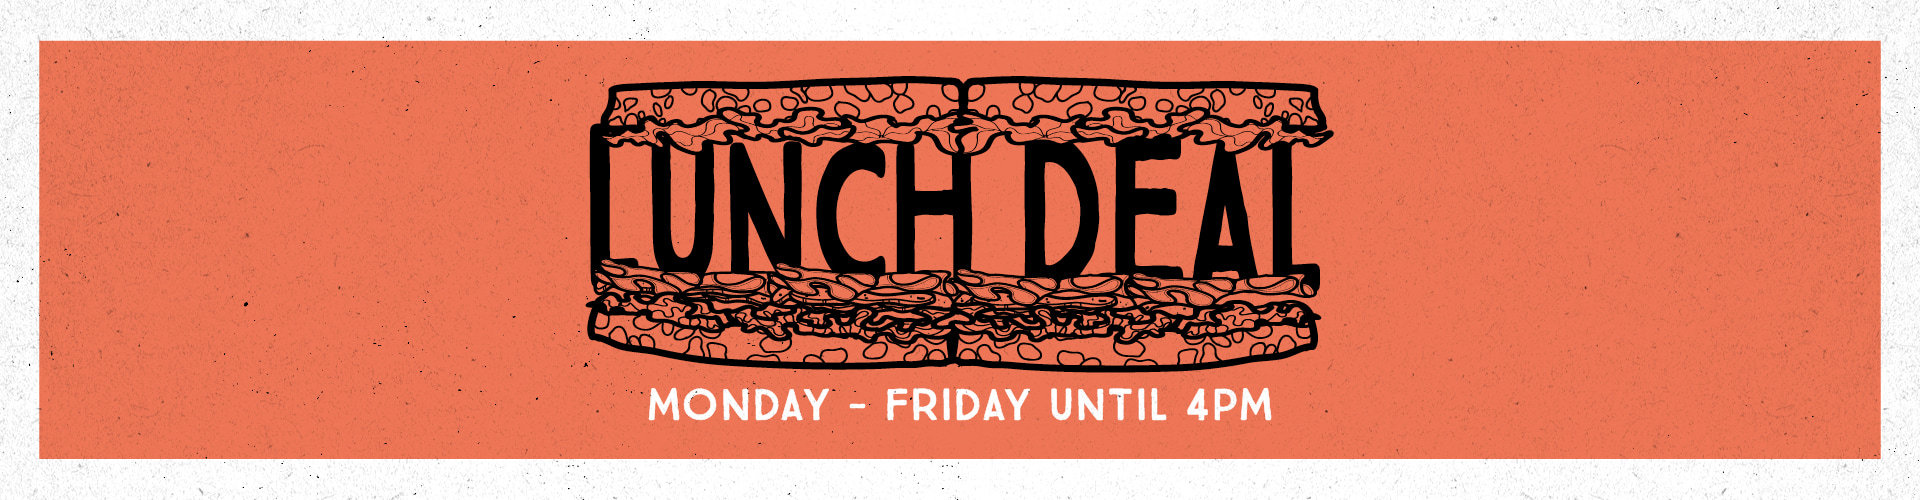 Lunch Deal. Monday-Friday until 4pm